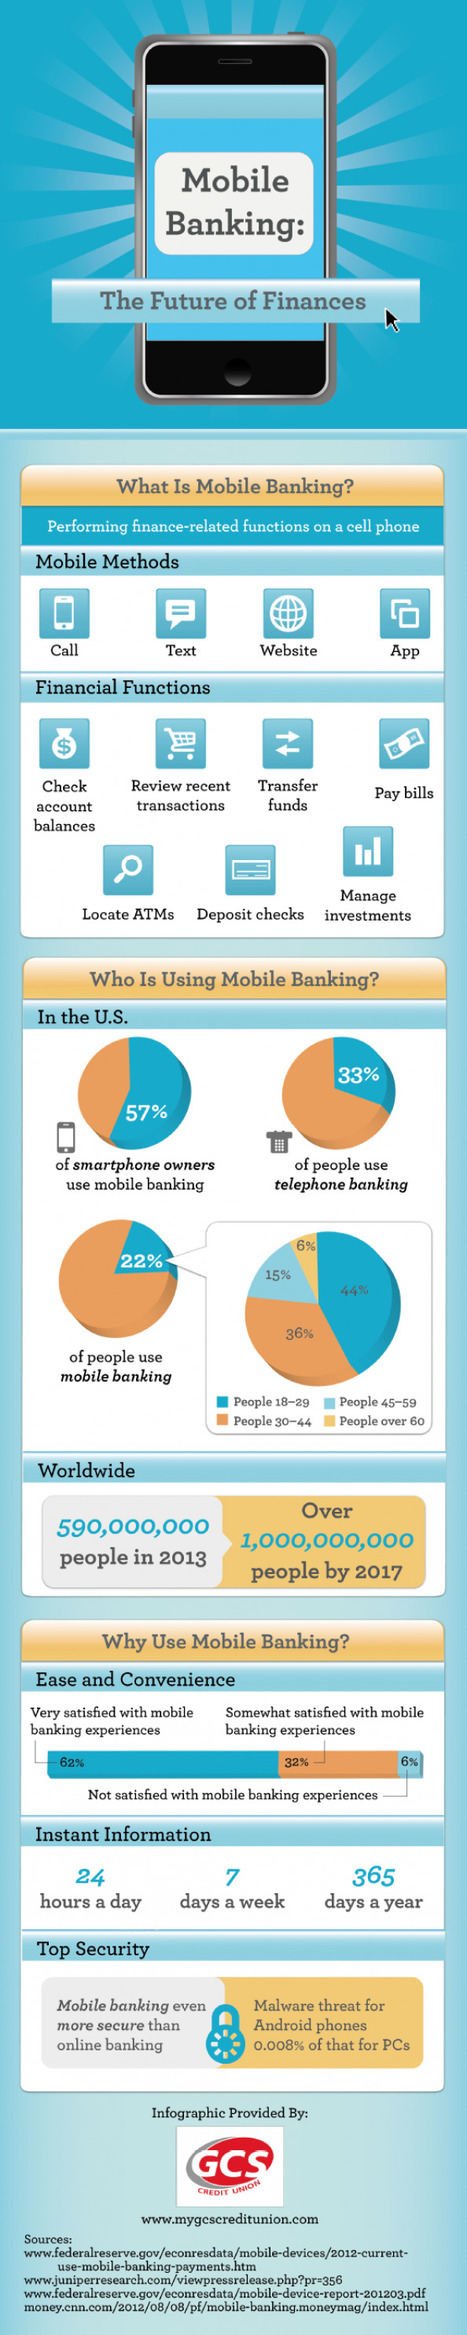 Infographic: Understanding Mobile Banking | Mobile Technology | Scoop.it